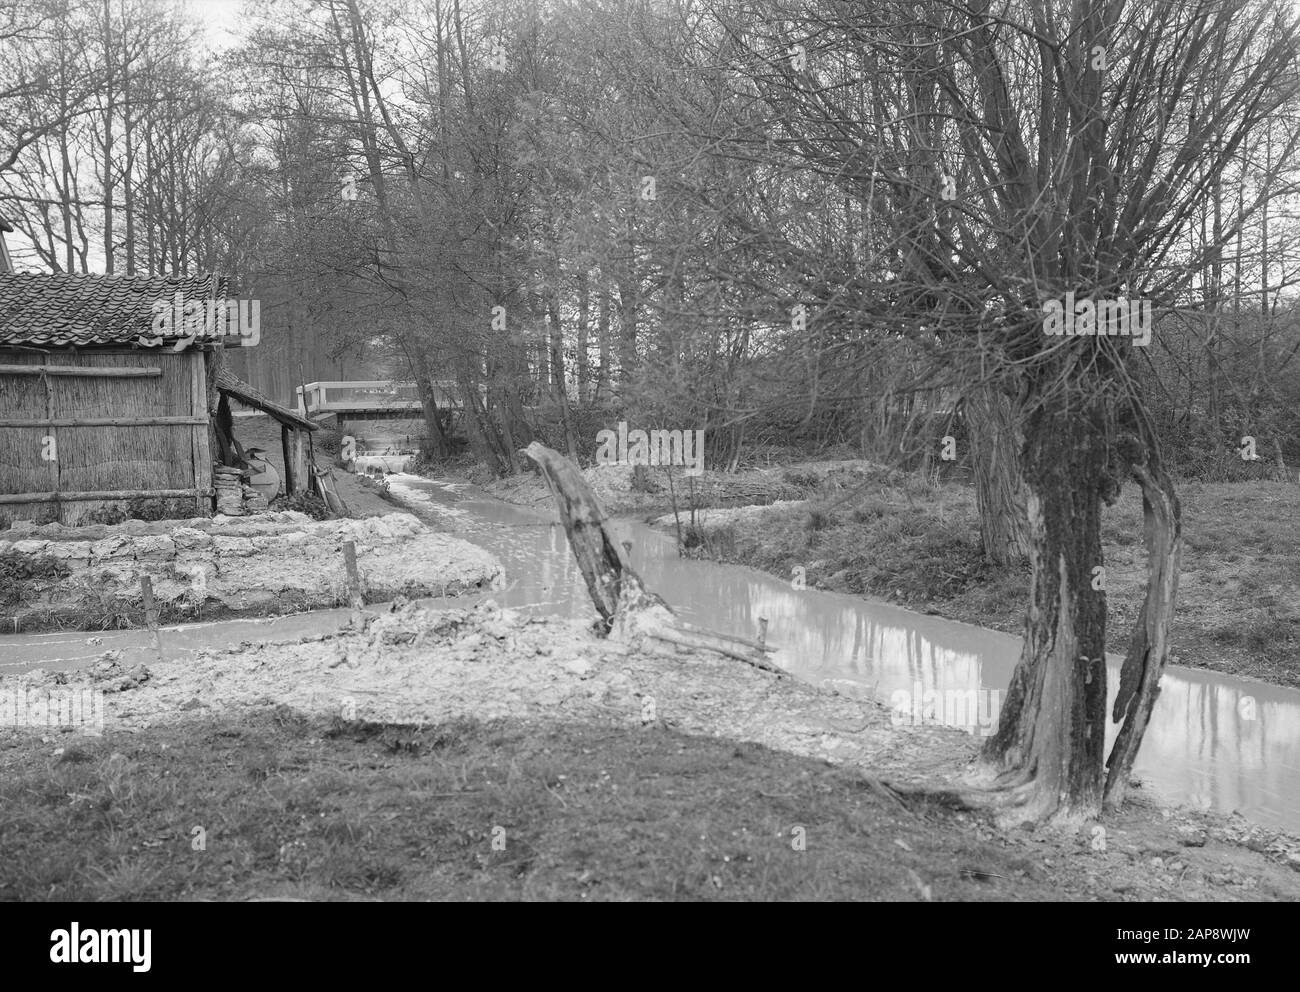 near huize voorstood Date: undated Keywords: cleaning waste water, pollutions, handling urban waste Personal name: voorstondense brook Stock Photo